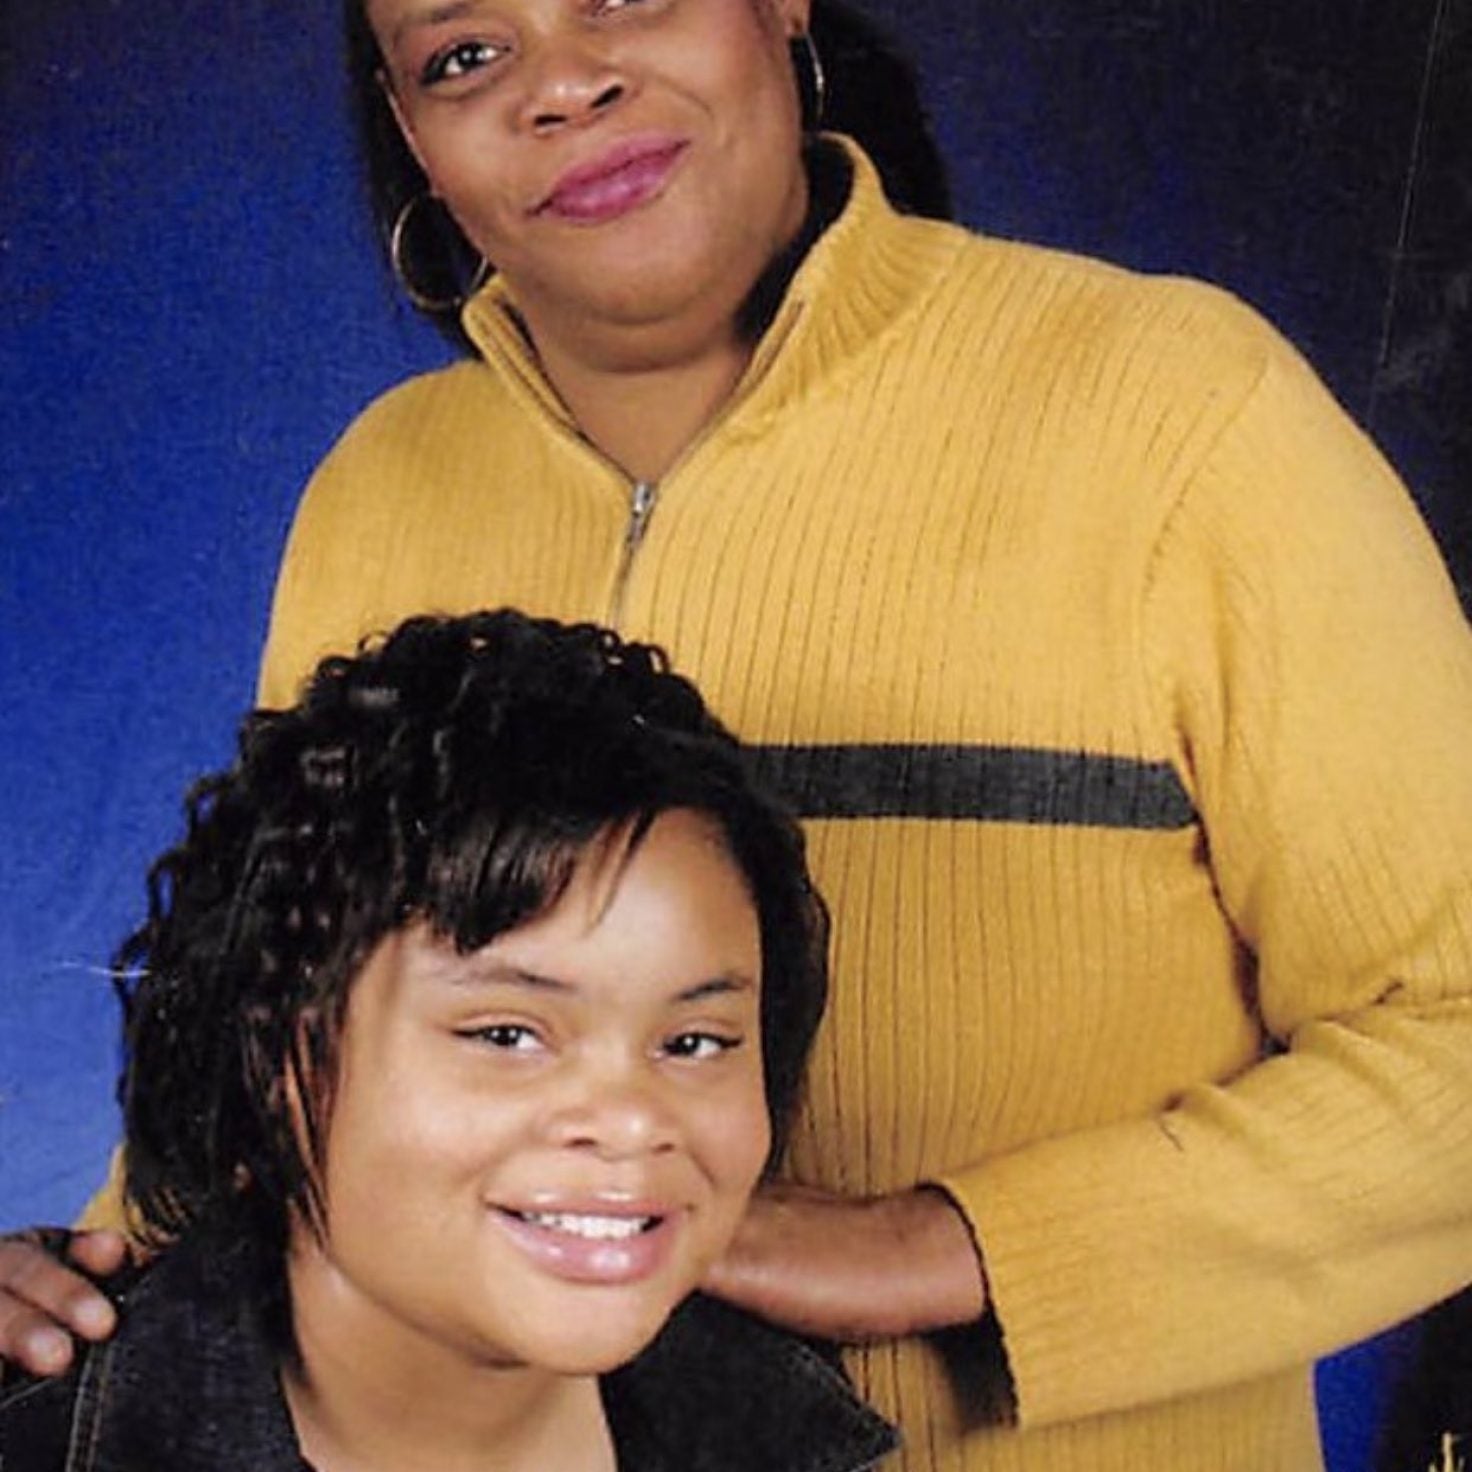 Mother Of Atatiana Jefferson Dies Months After Her Daughter's Killing